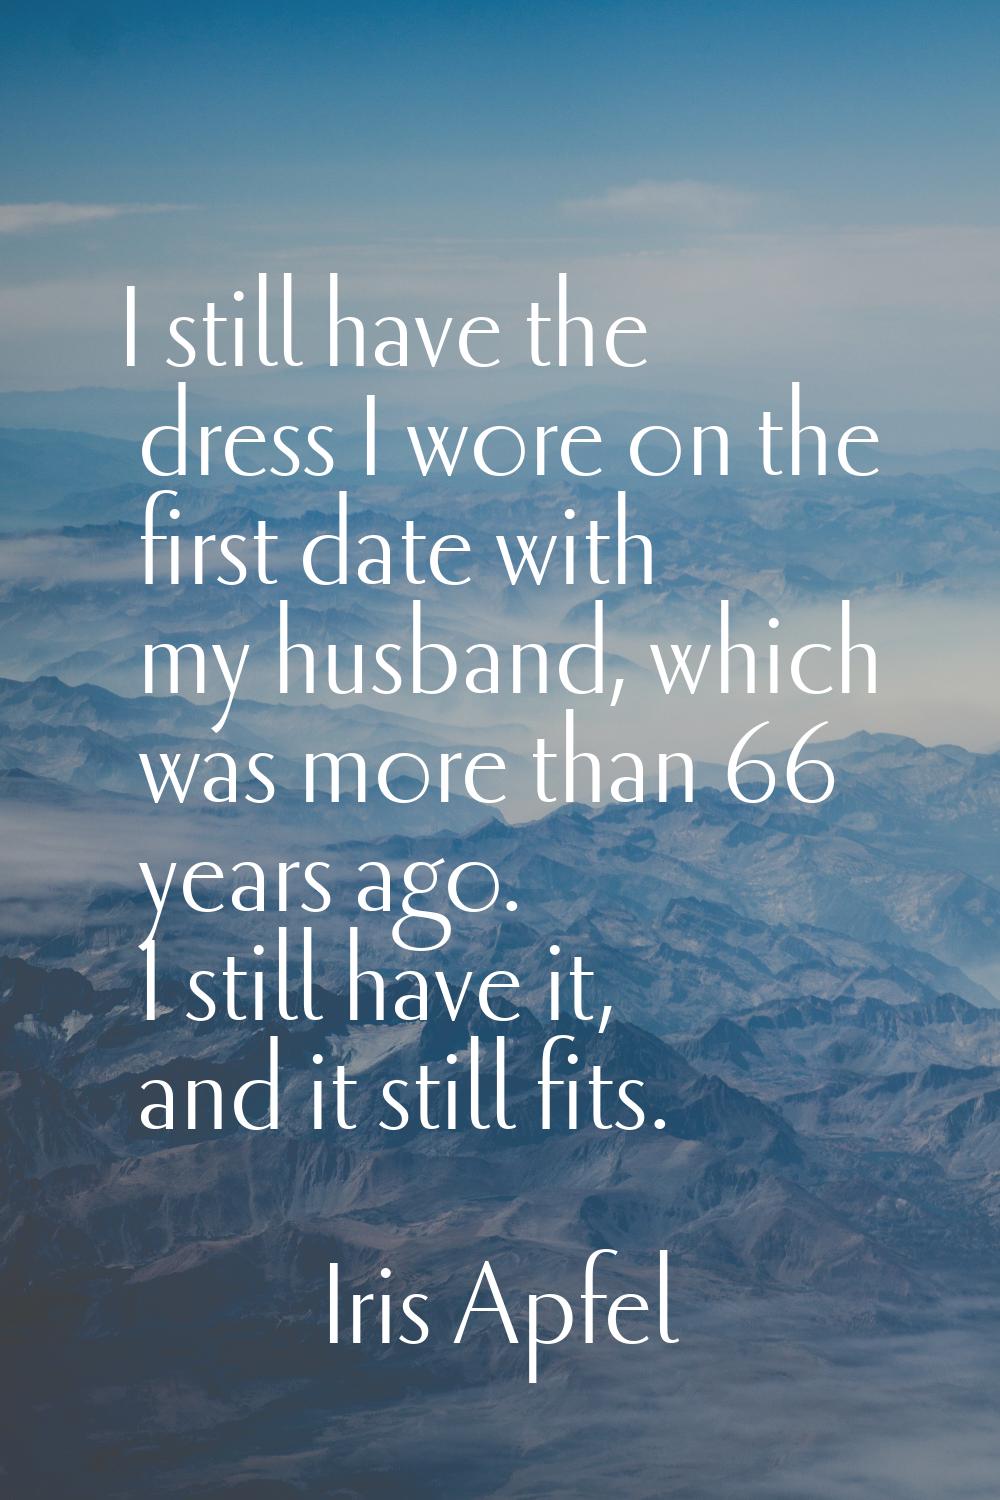 I still have the dress I wore on the first date with my husband, which was more than 66 years ago. 